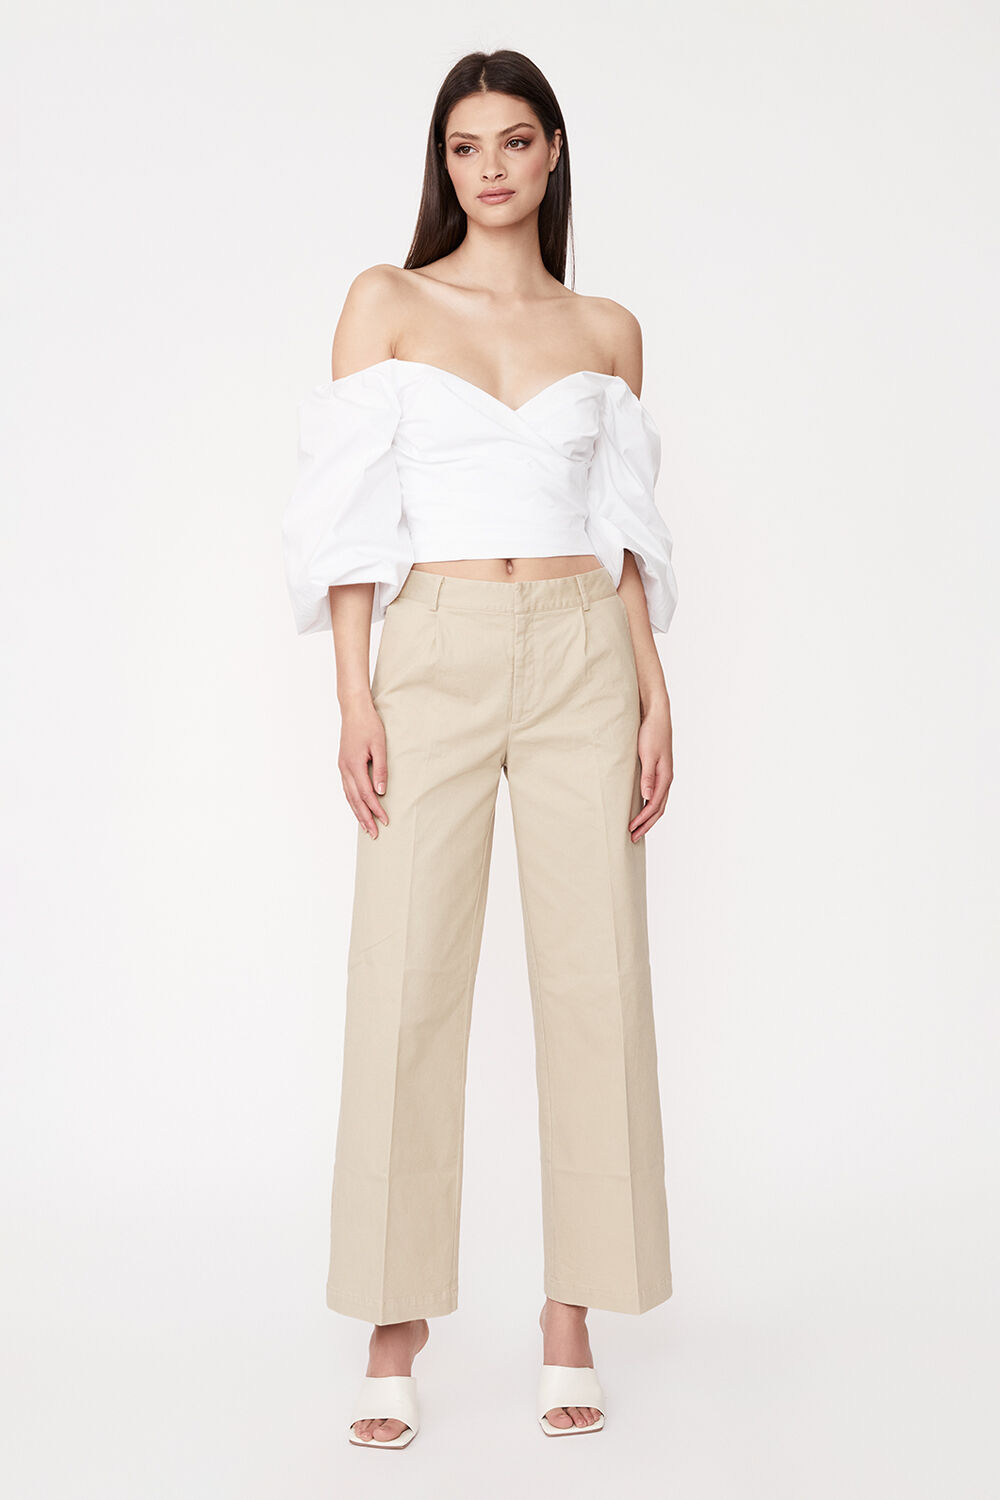 LOW RISE HIPSTER PANT in colour PINK TINT